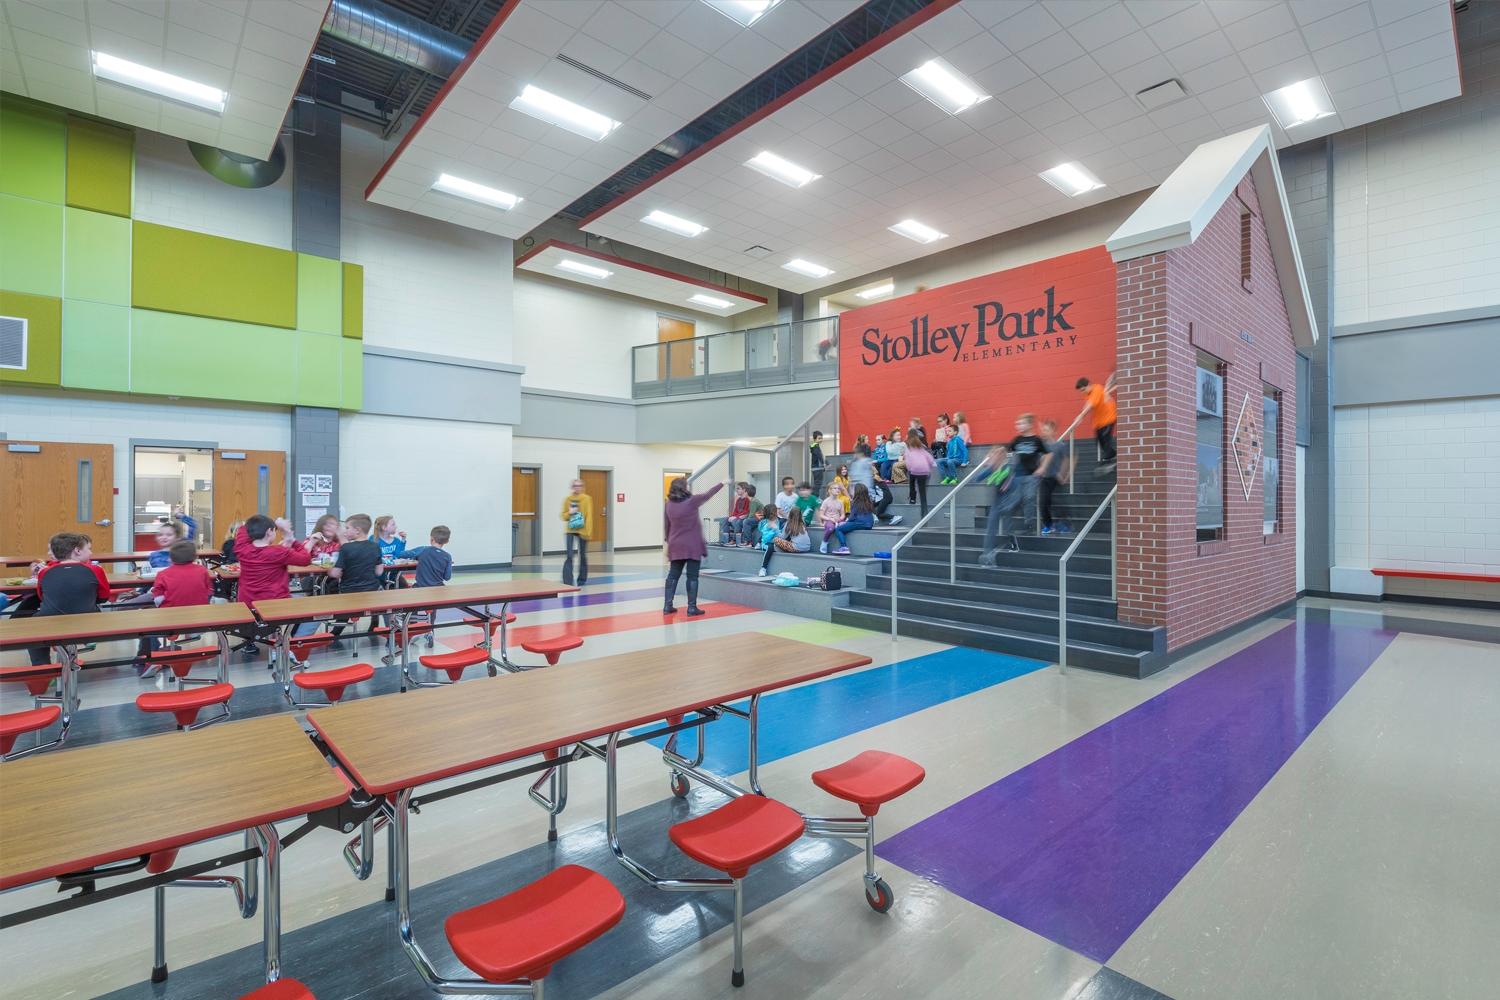 Commons area of Stolley Park Elementary School